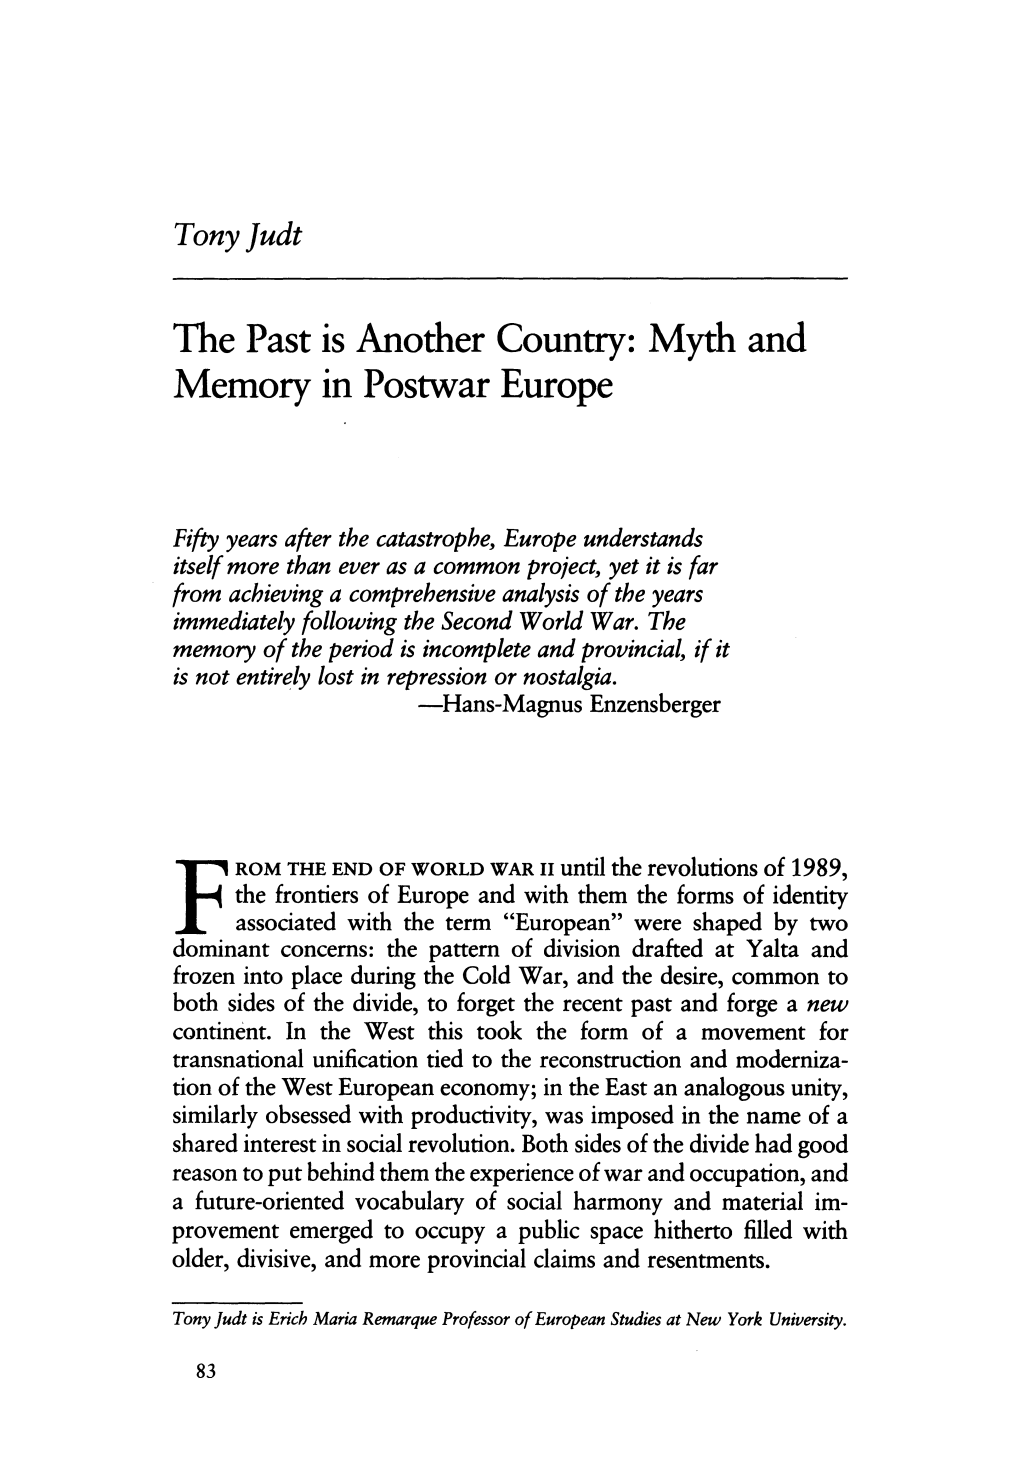 The Past Is Another Country: Myth and Memory in Postwar Europe